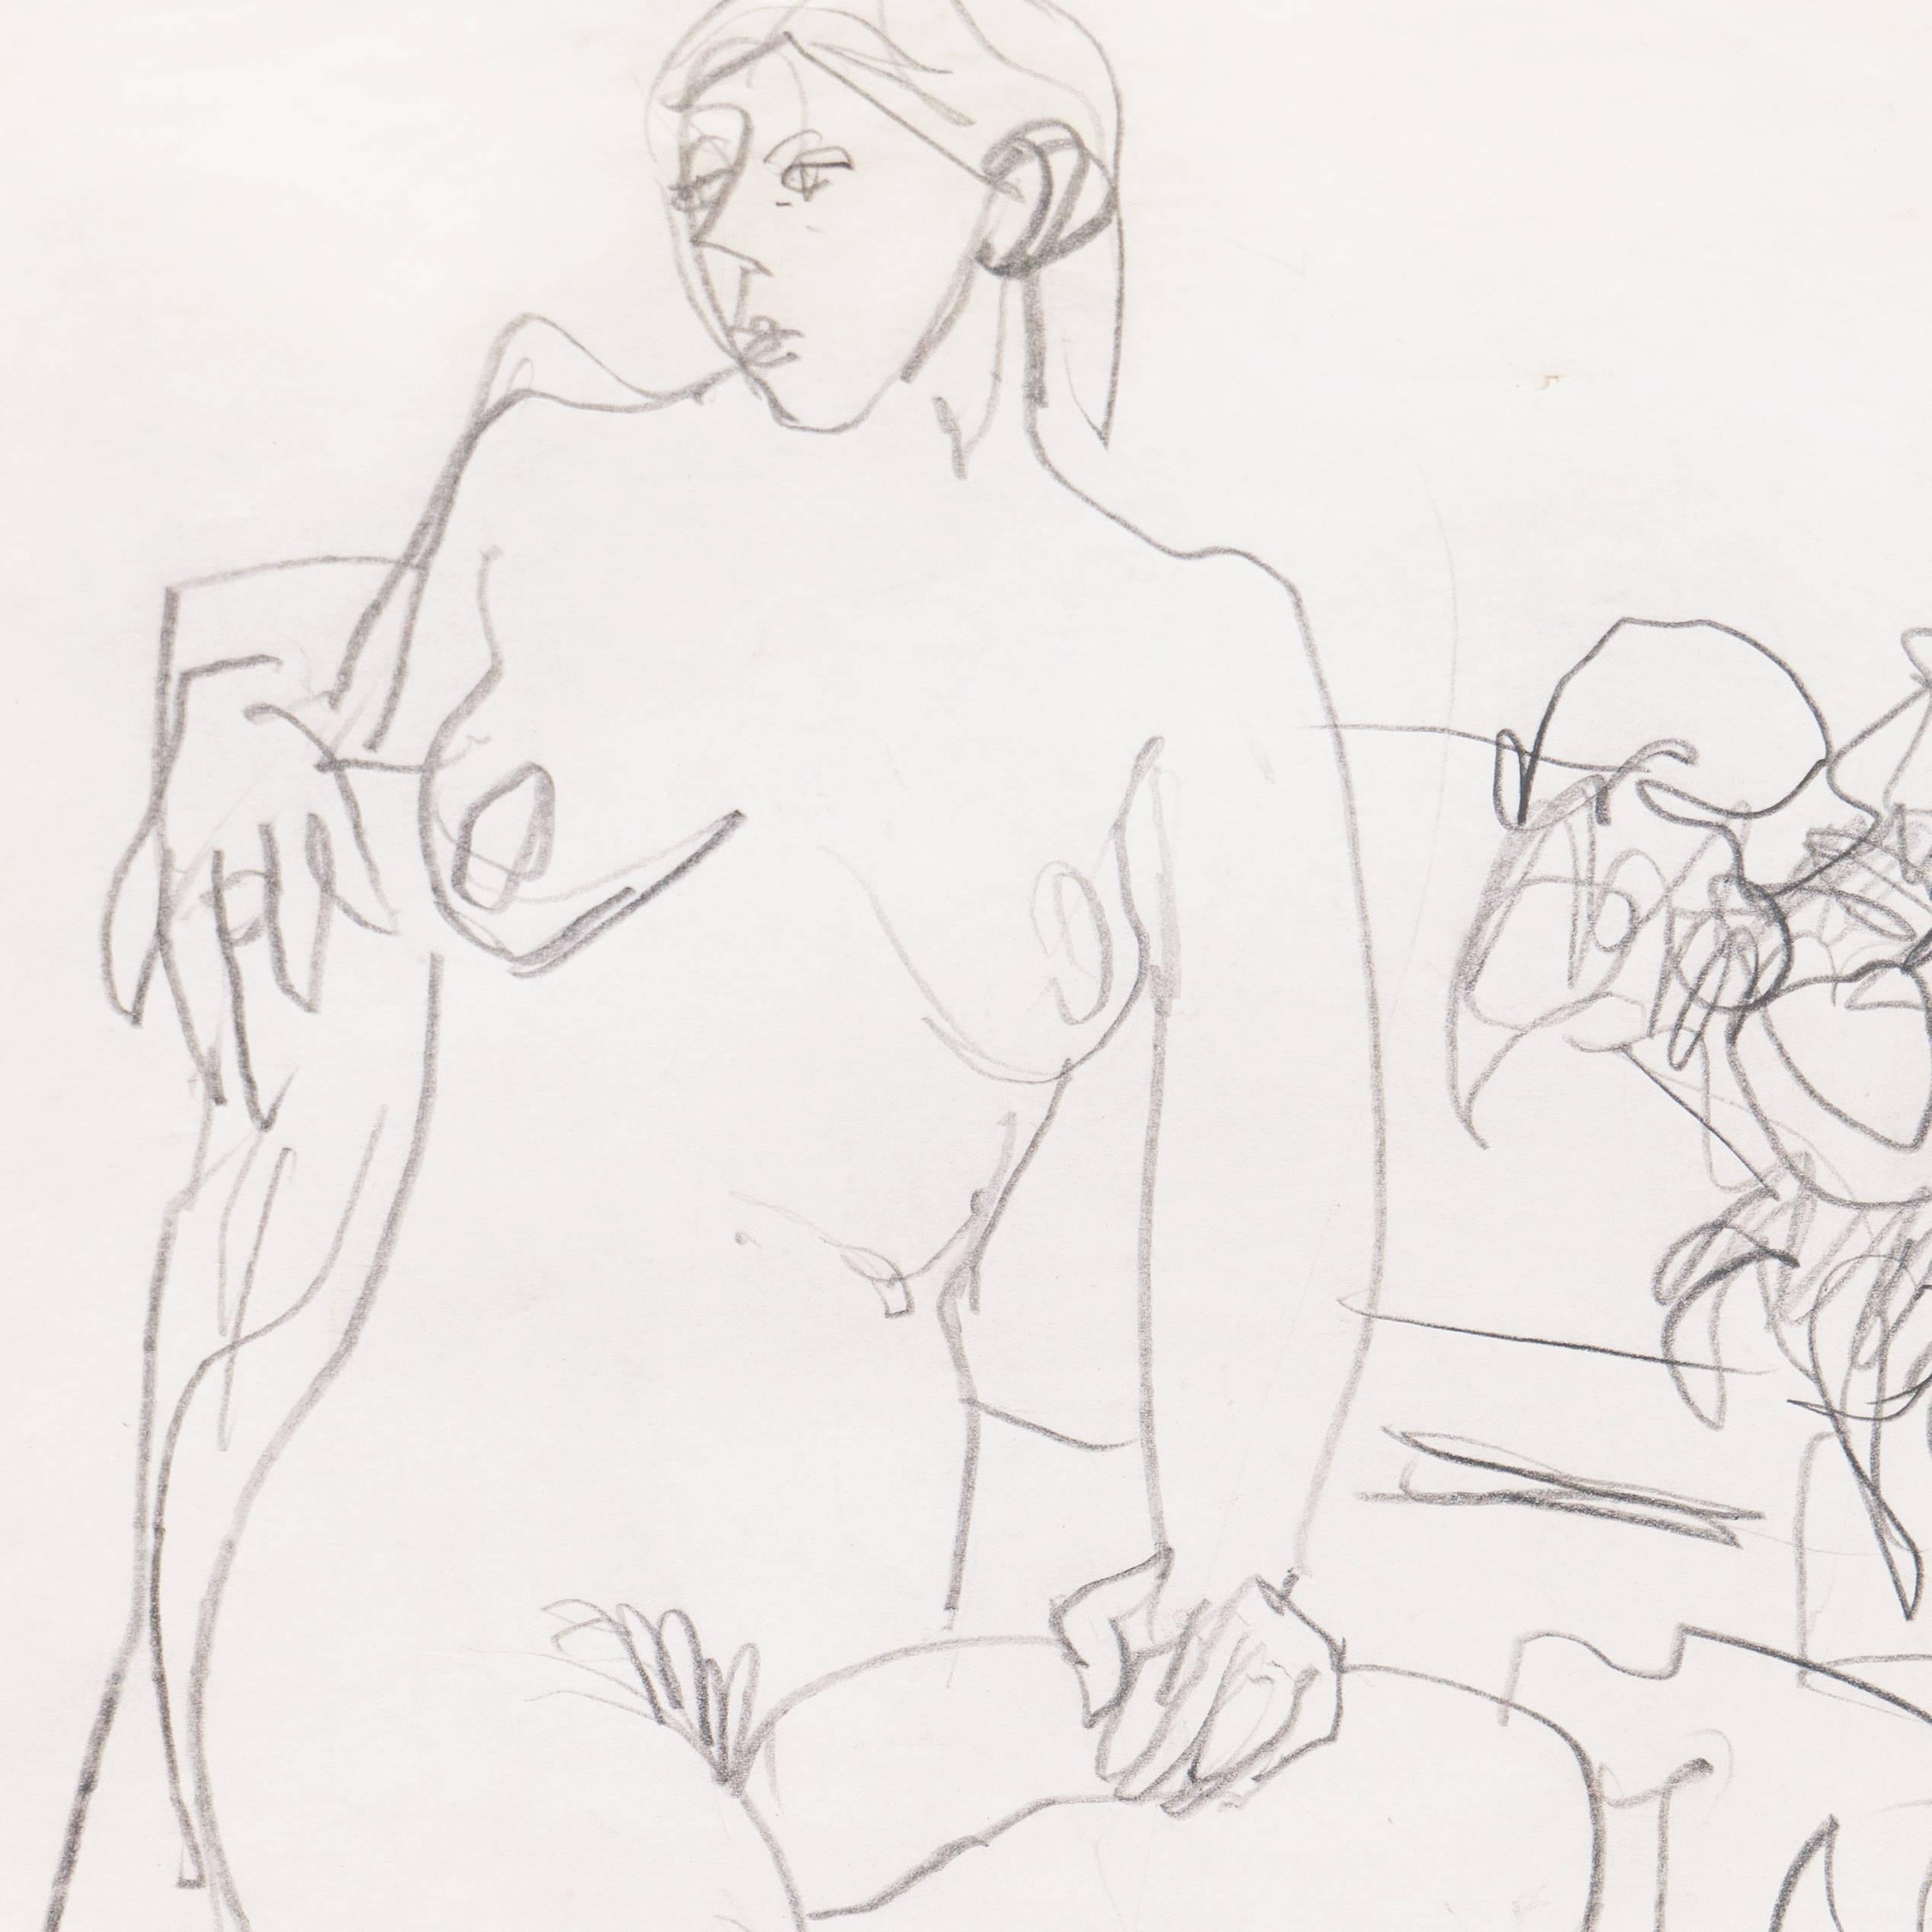 'Seated Nude', California Post-Impressionist, Louvre, Académie Chaumière, LACMA - Art by Victor Di Gesu